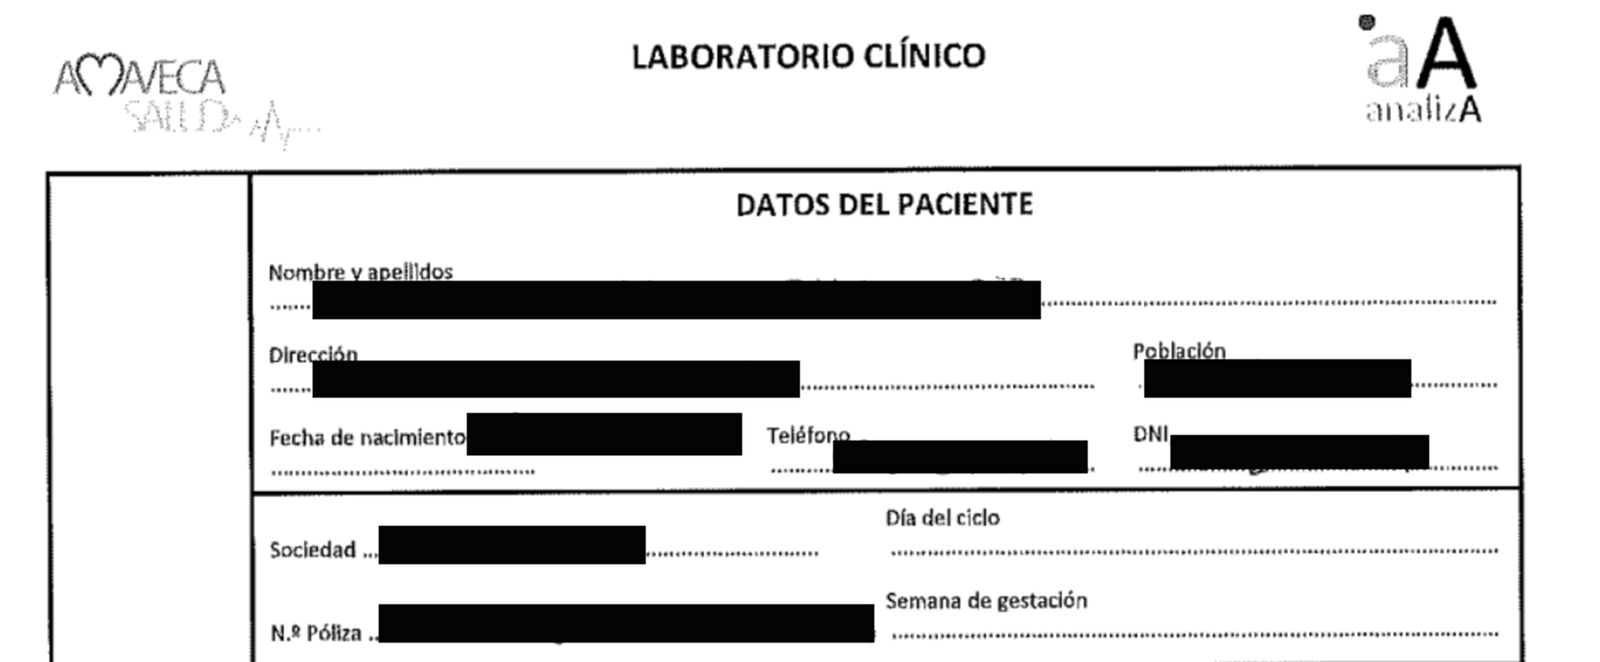 Patient record from data dump -- redacted